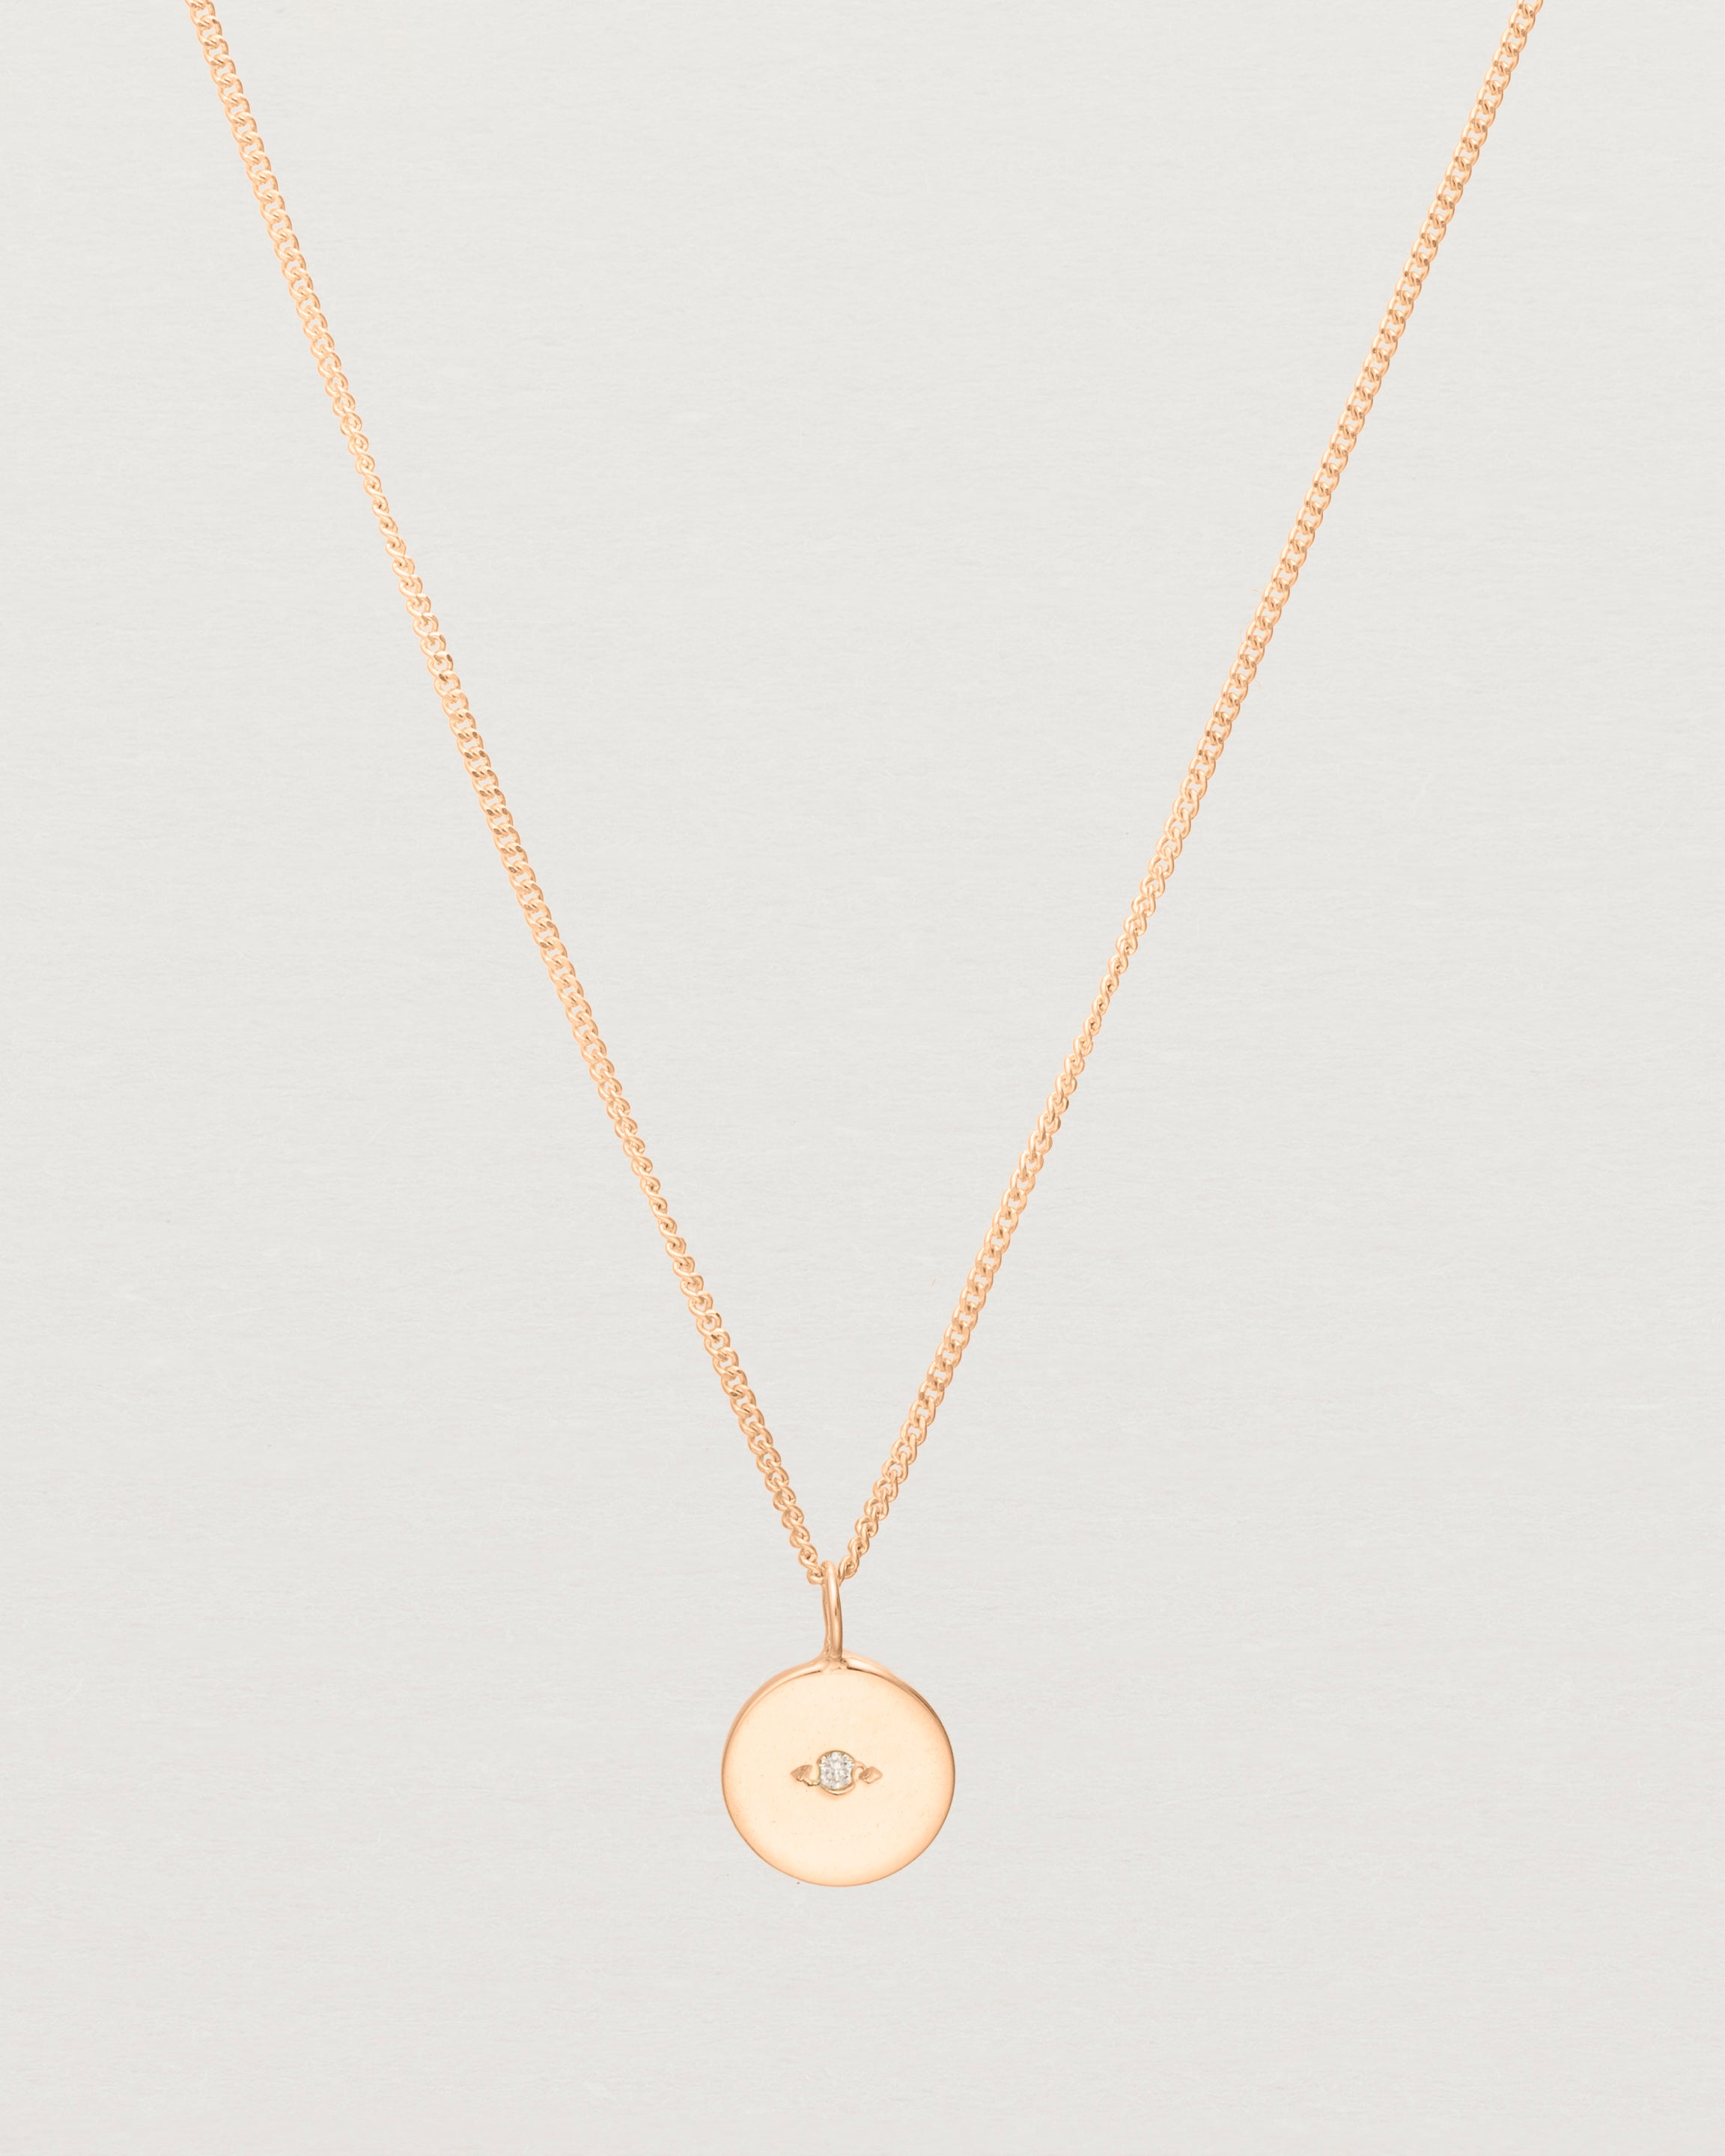 Close up of the Eily Necklace with a diamond in rose gold.